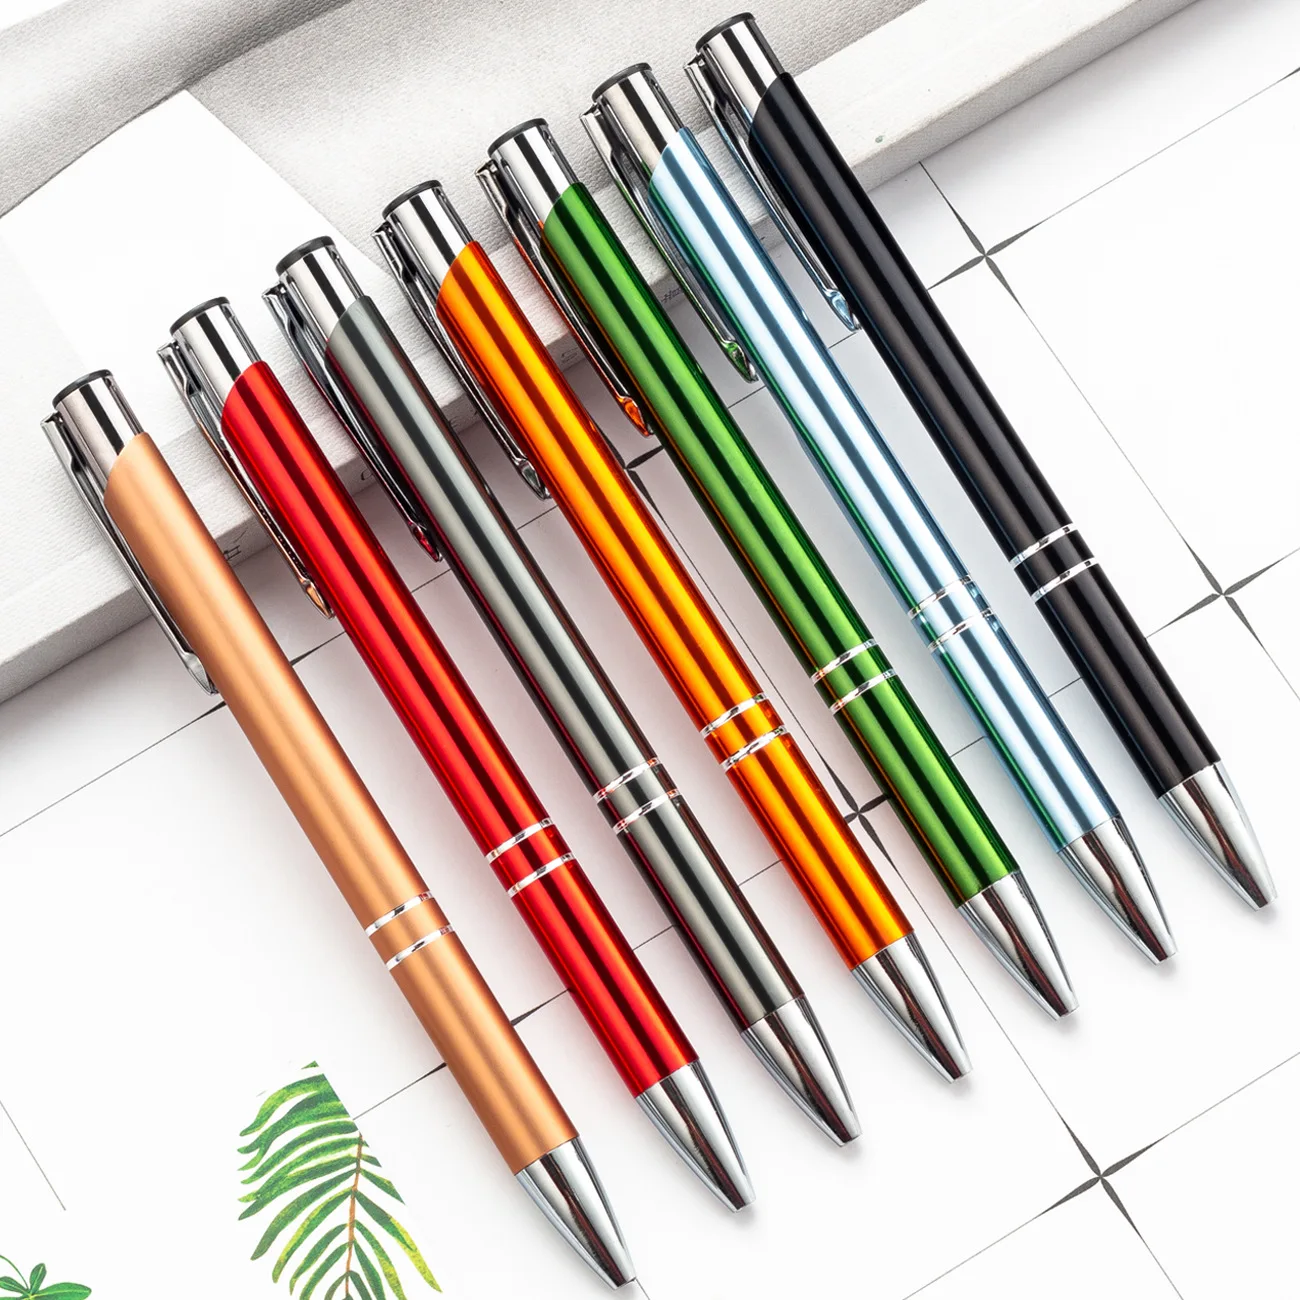 10pcs Metal Press Ballpoint Pen Essentials Writing Fluency Tests Gifts For Students